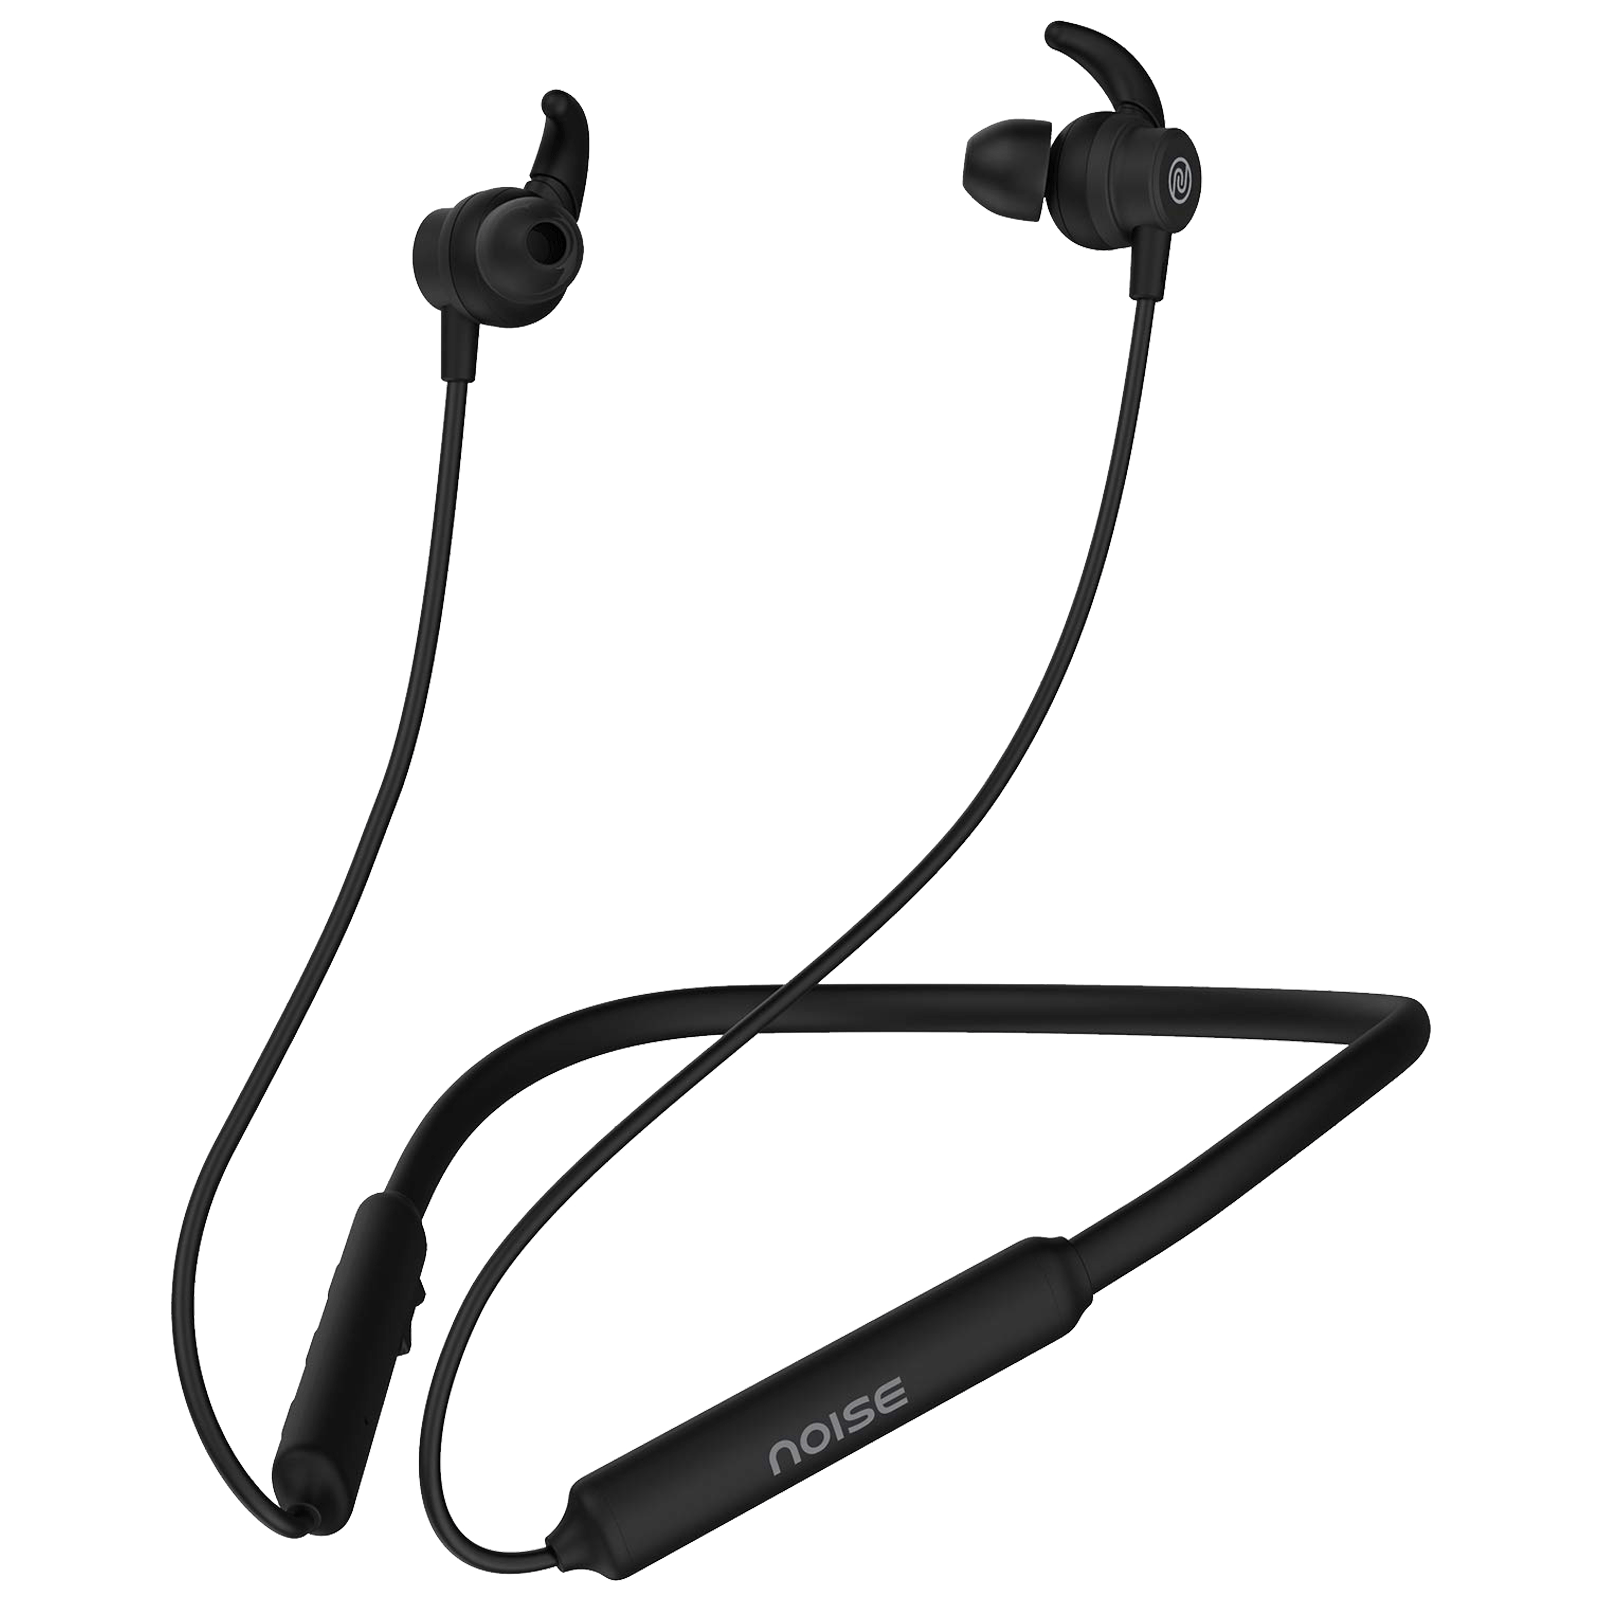 noise - noise Tune Active In-Ear Wireless Earphone with Mic (Bluetooth 5.0, IPX5 Water Resistant, Black)